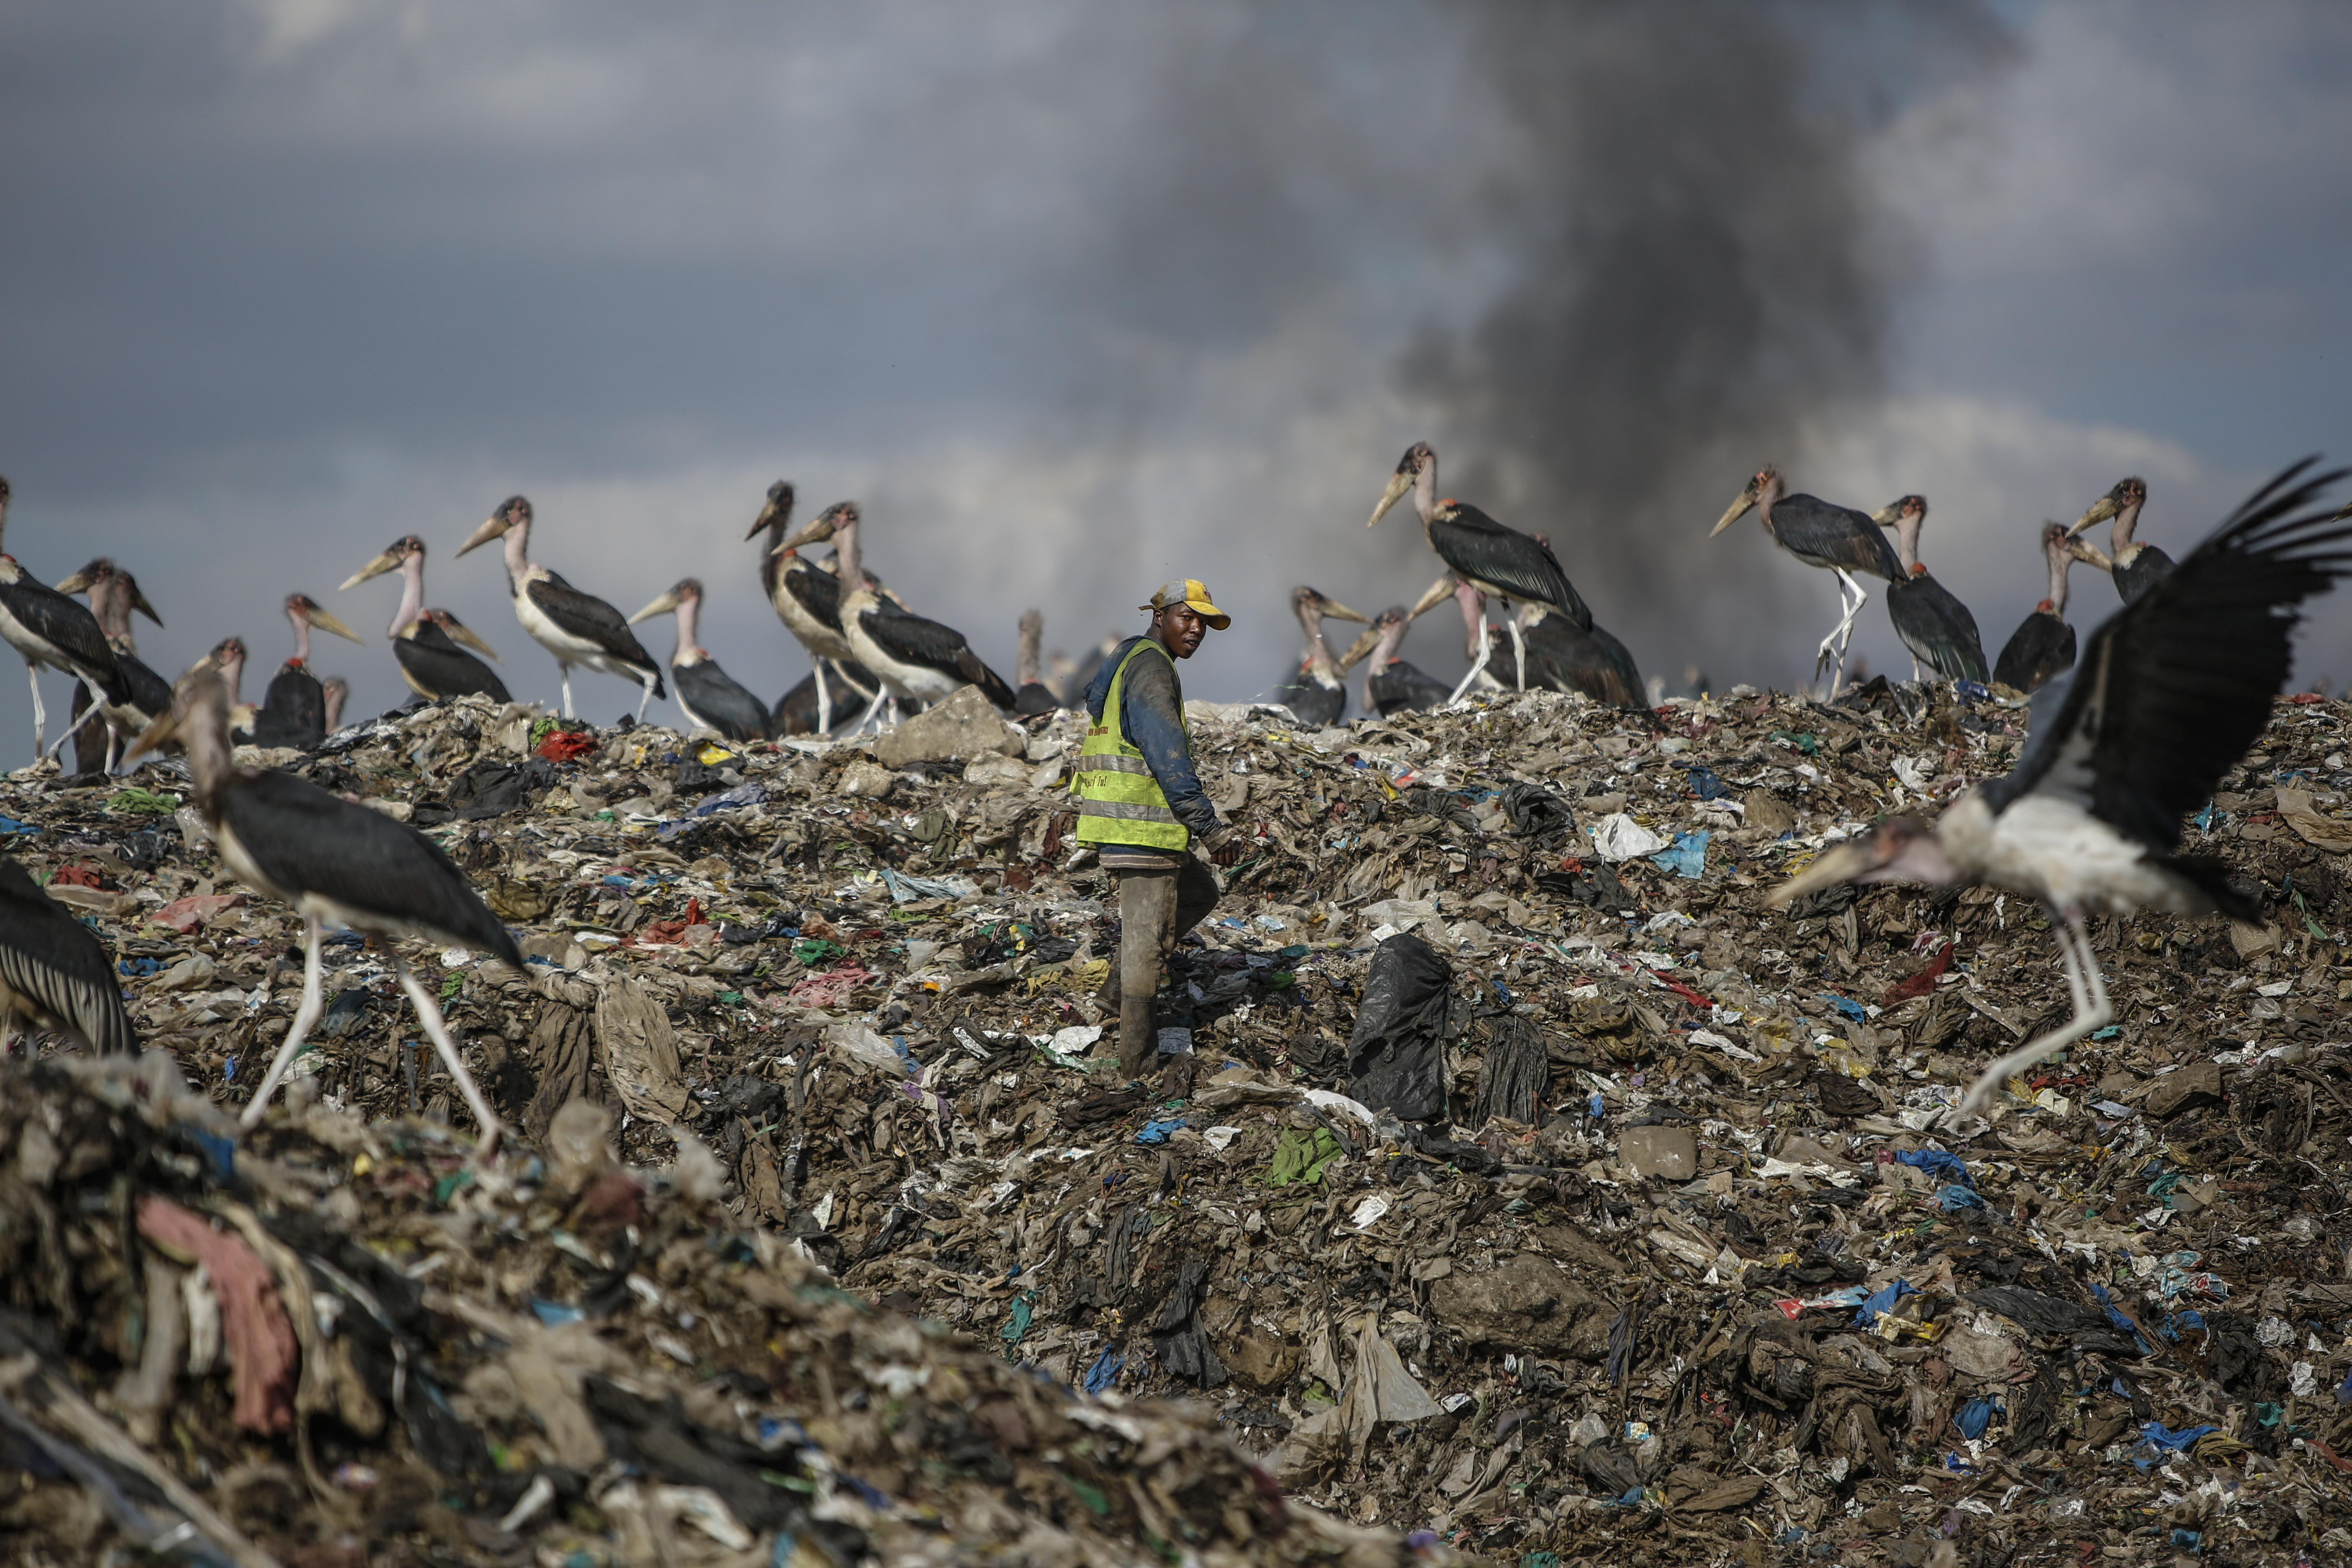 A recycling scavenger walks among storks in Nairobi.